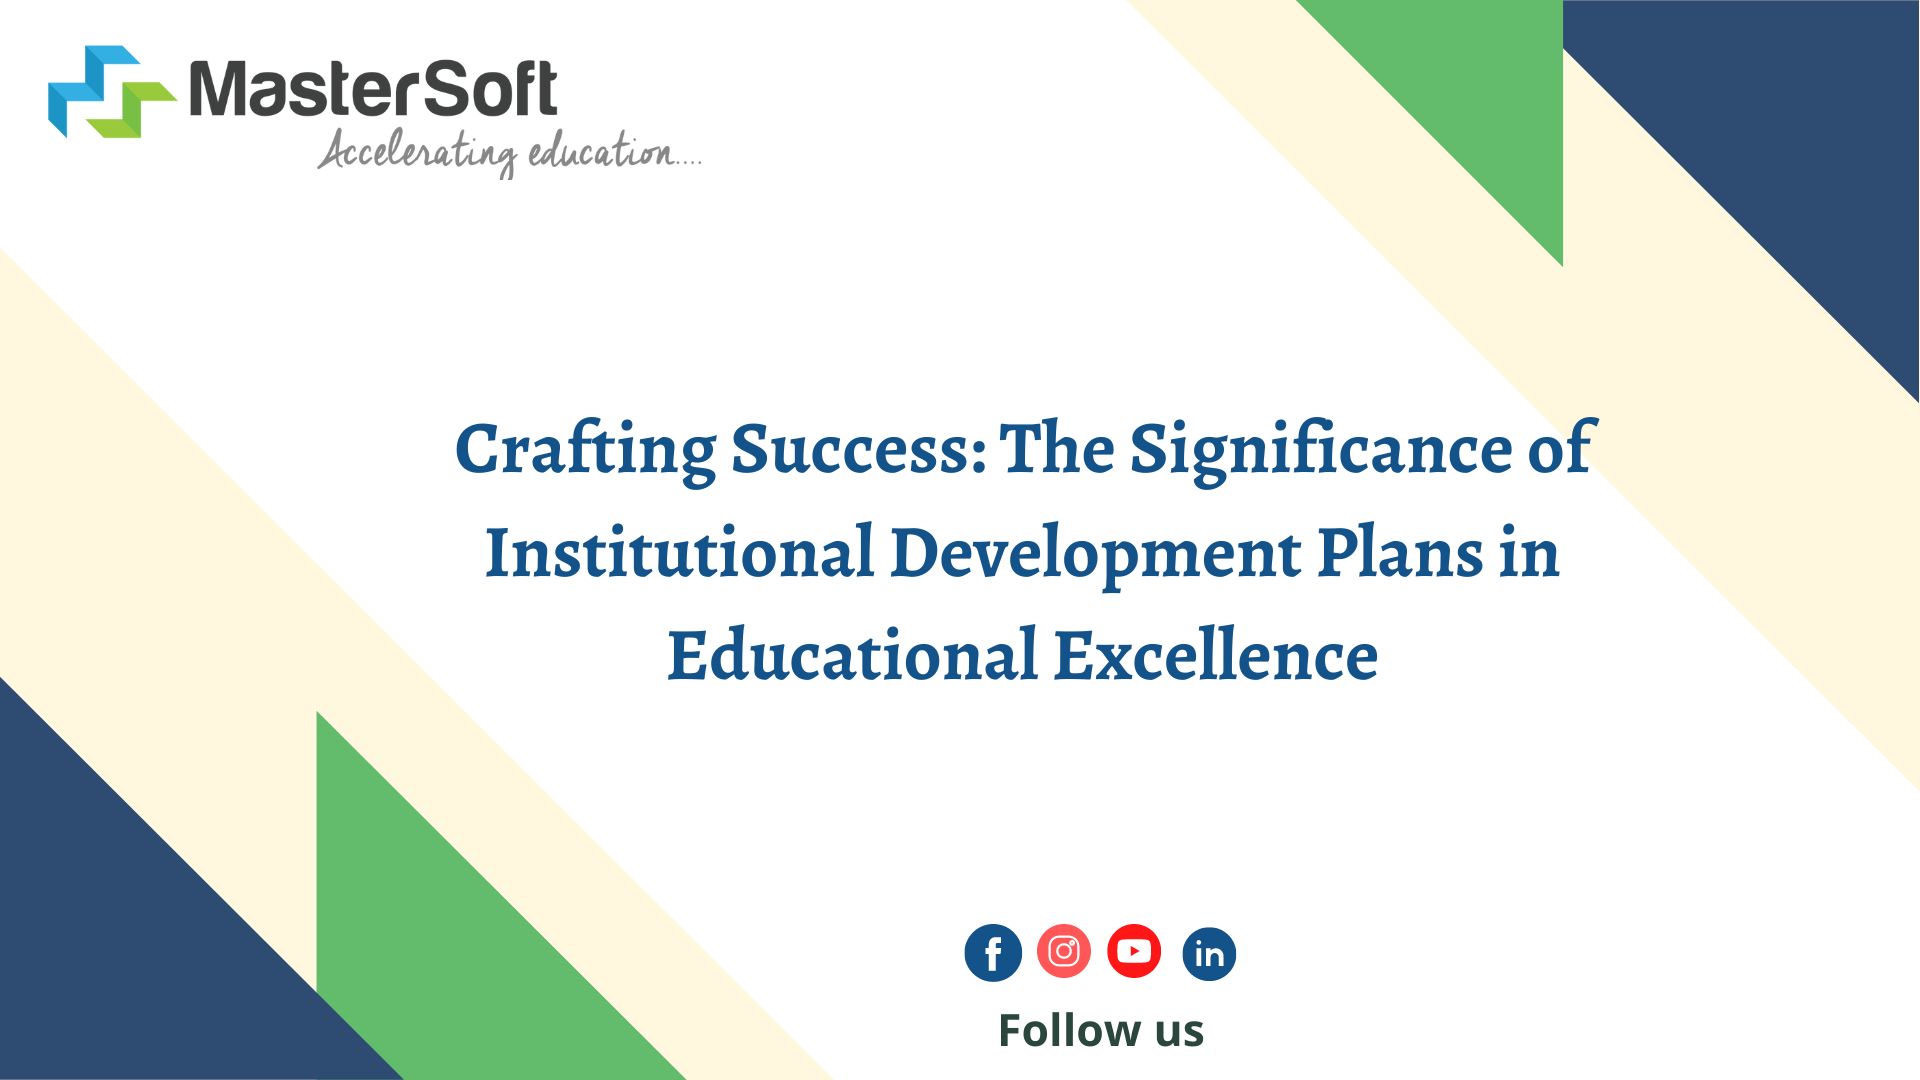 Crafting Success: The Significance of Institutional Development Plans in Educational Excellence